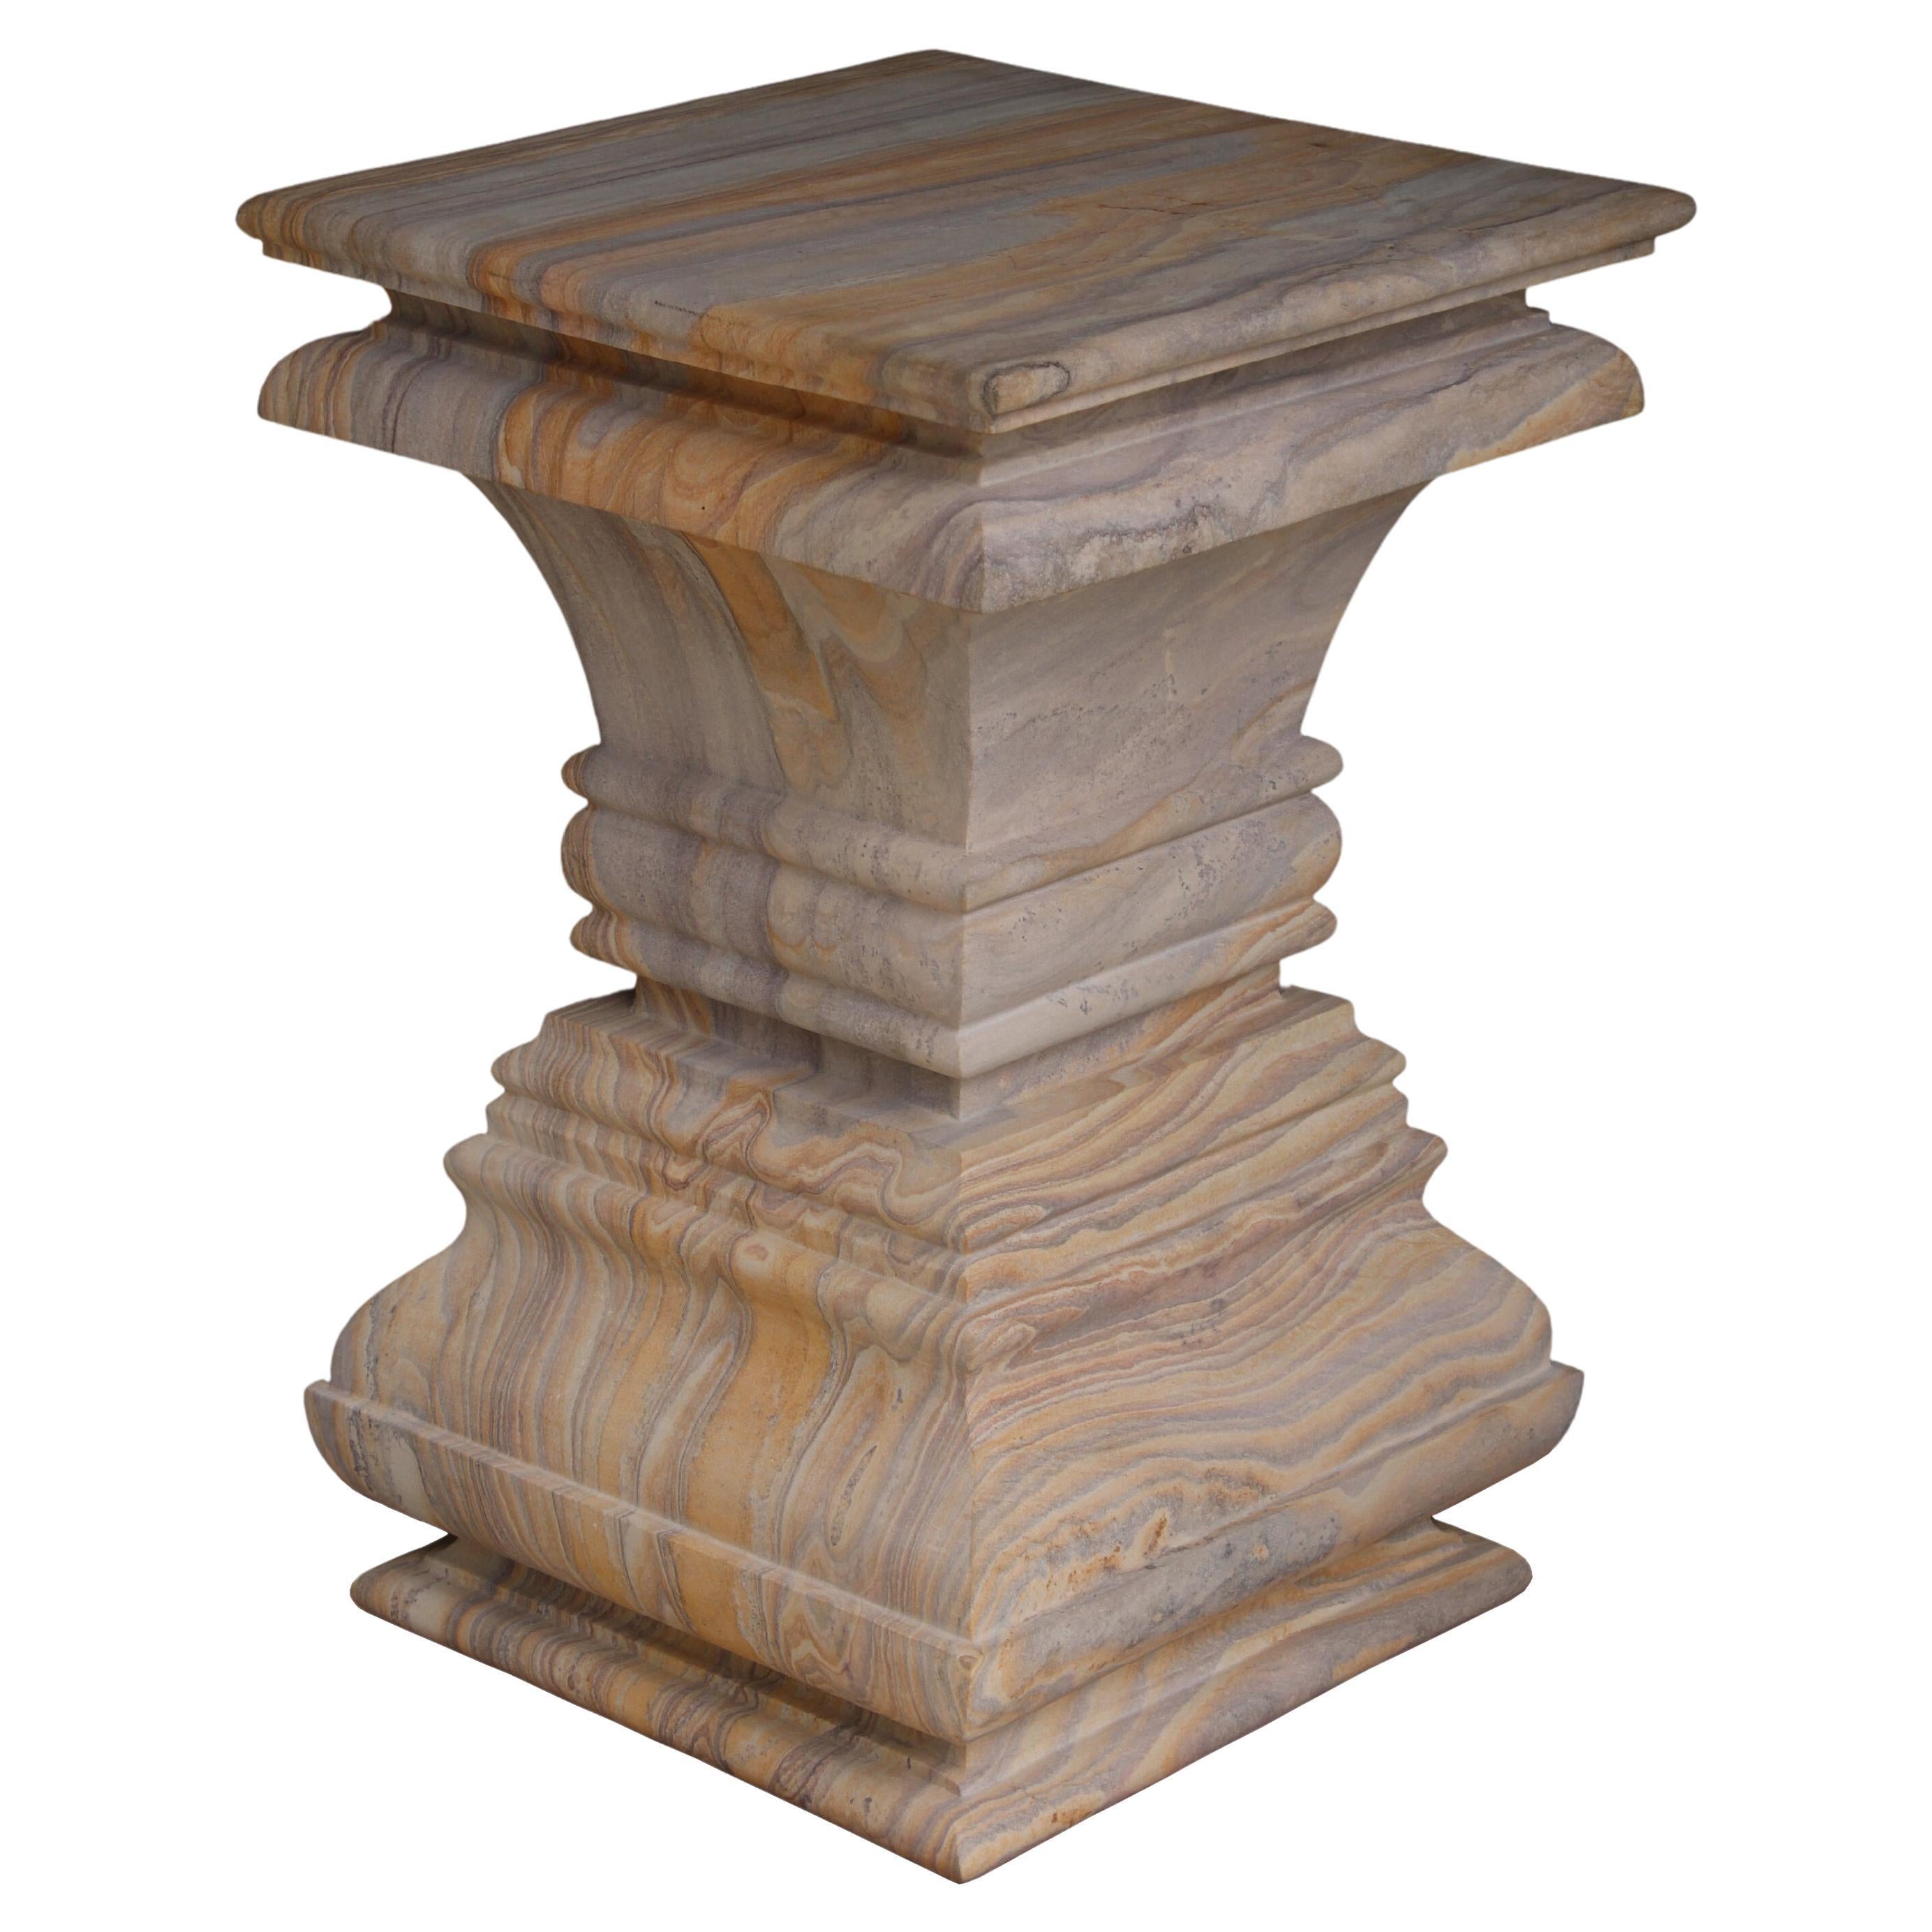 Modern Square Architectural Pedestal Side Table in Rainbow Teakwood Stone